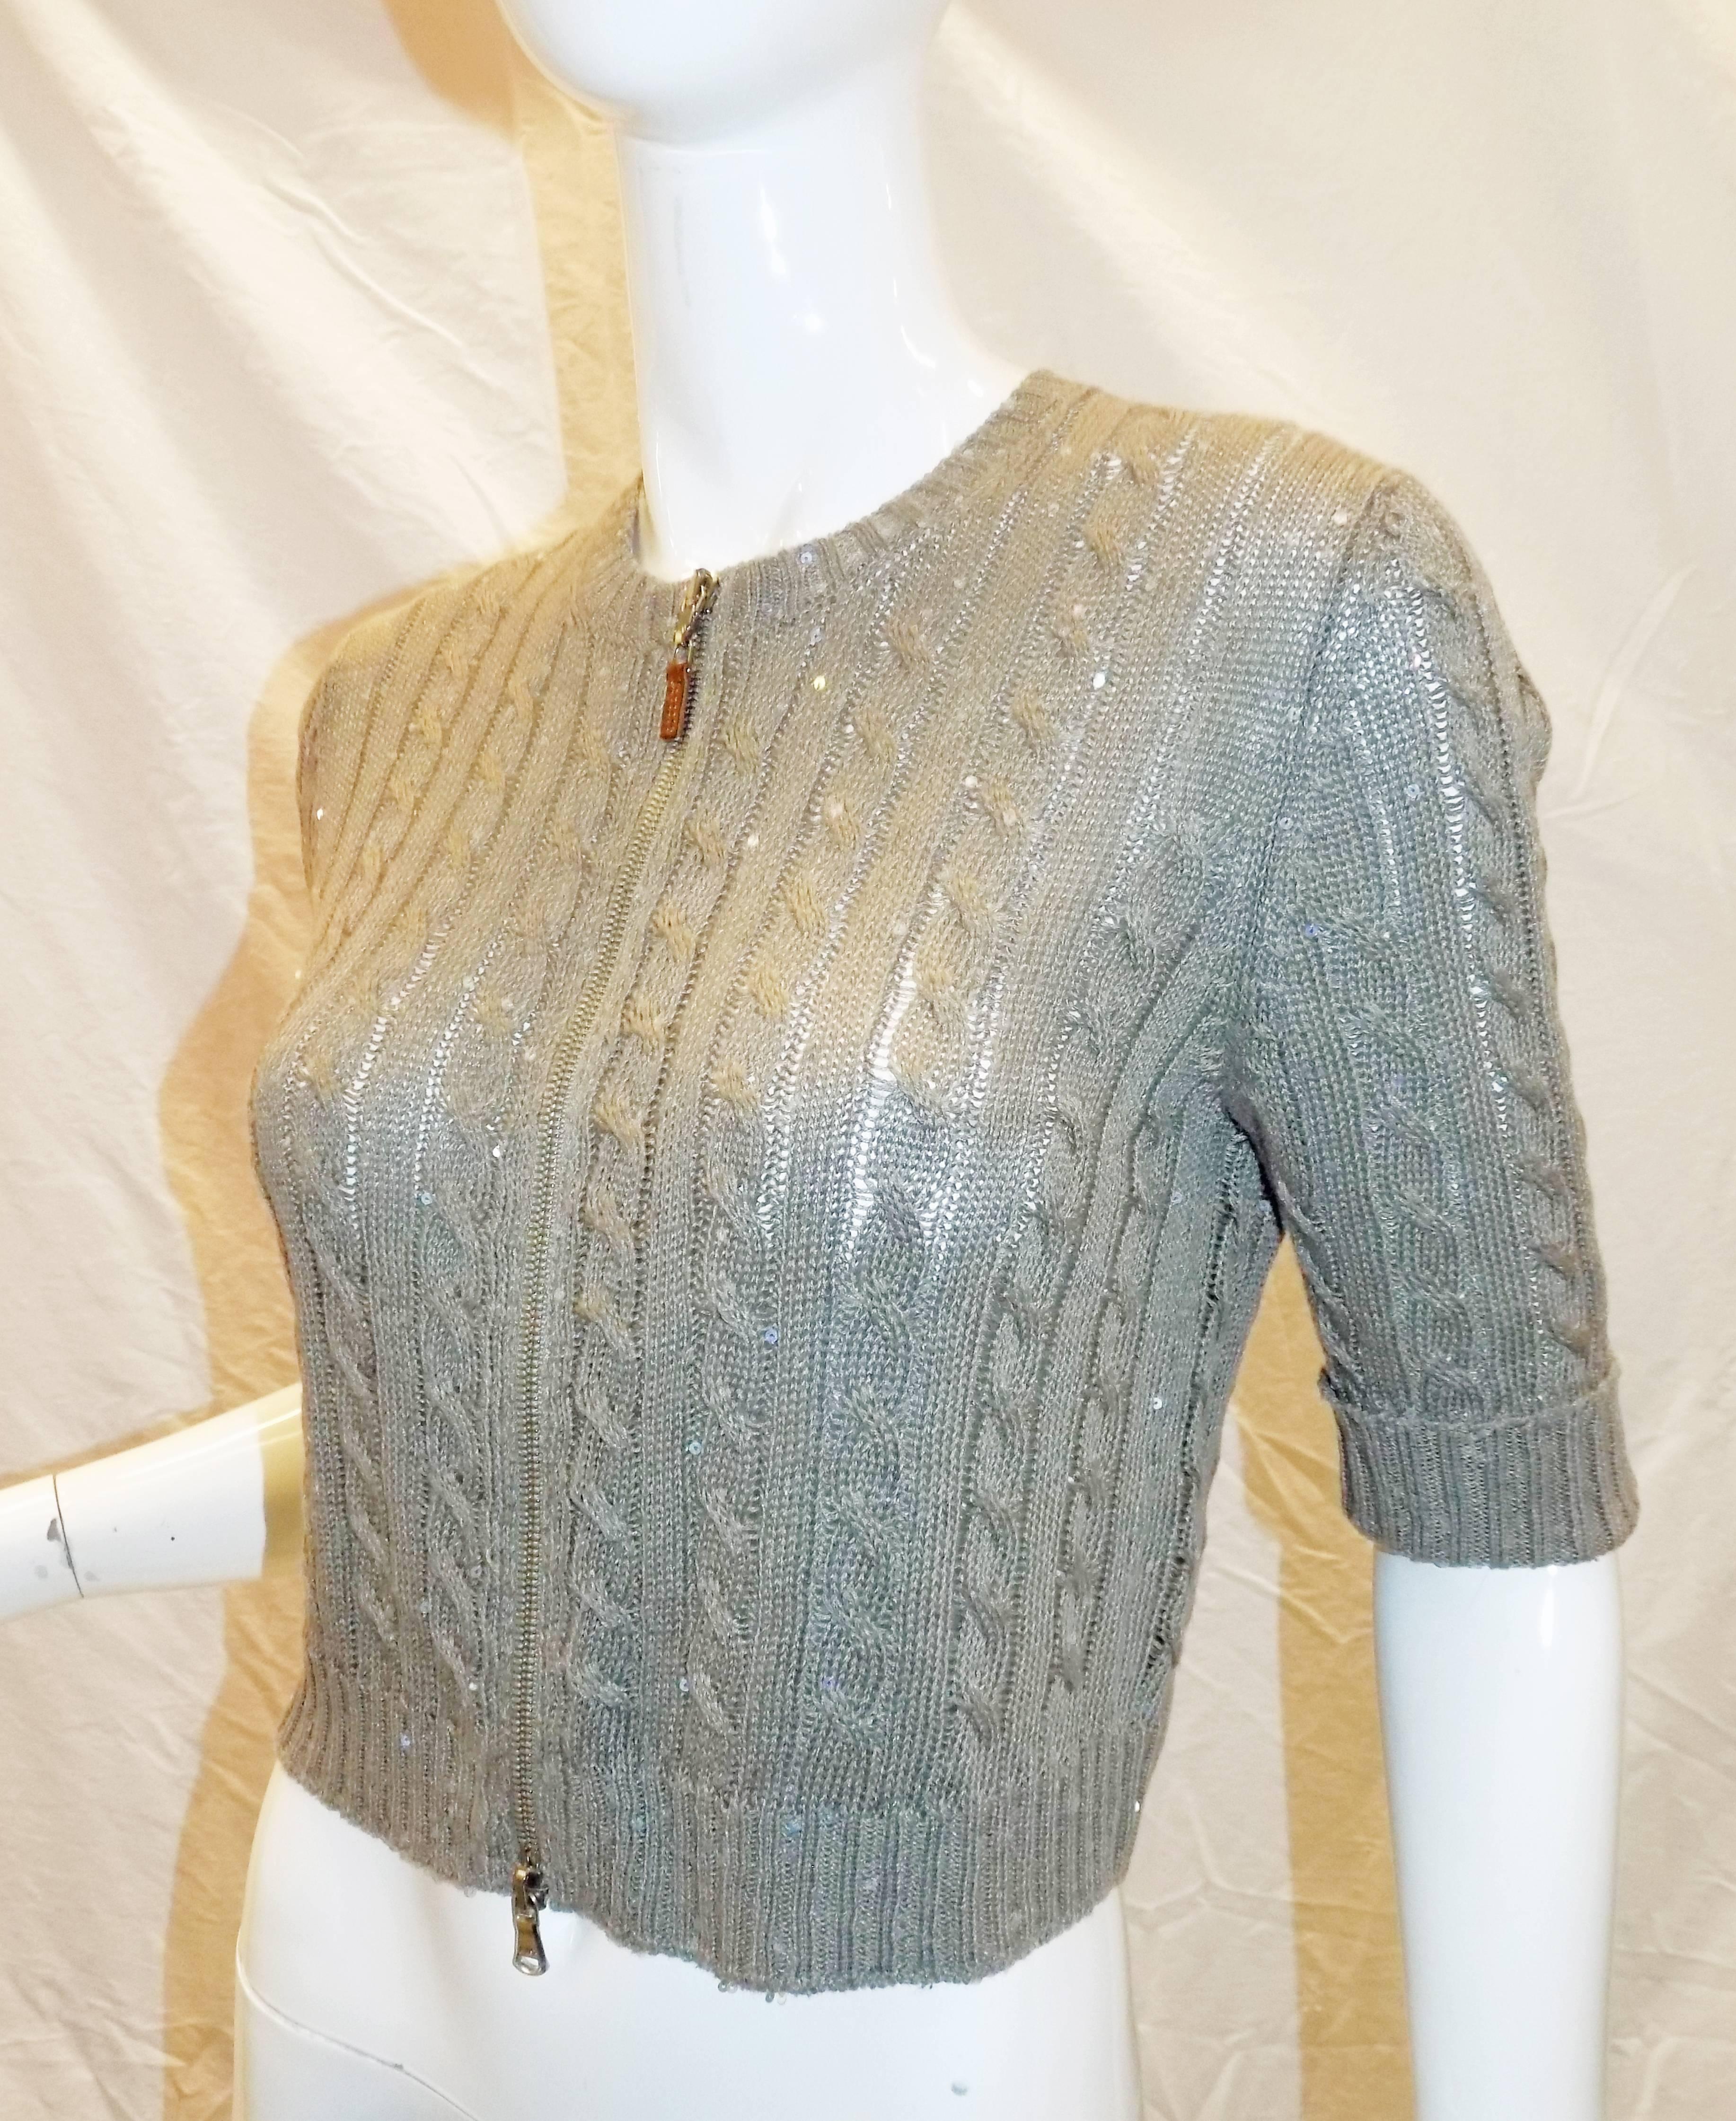 Women's Brunello Cucinelli cable Knit Sequined Sweater cardigan crop top w zipper front